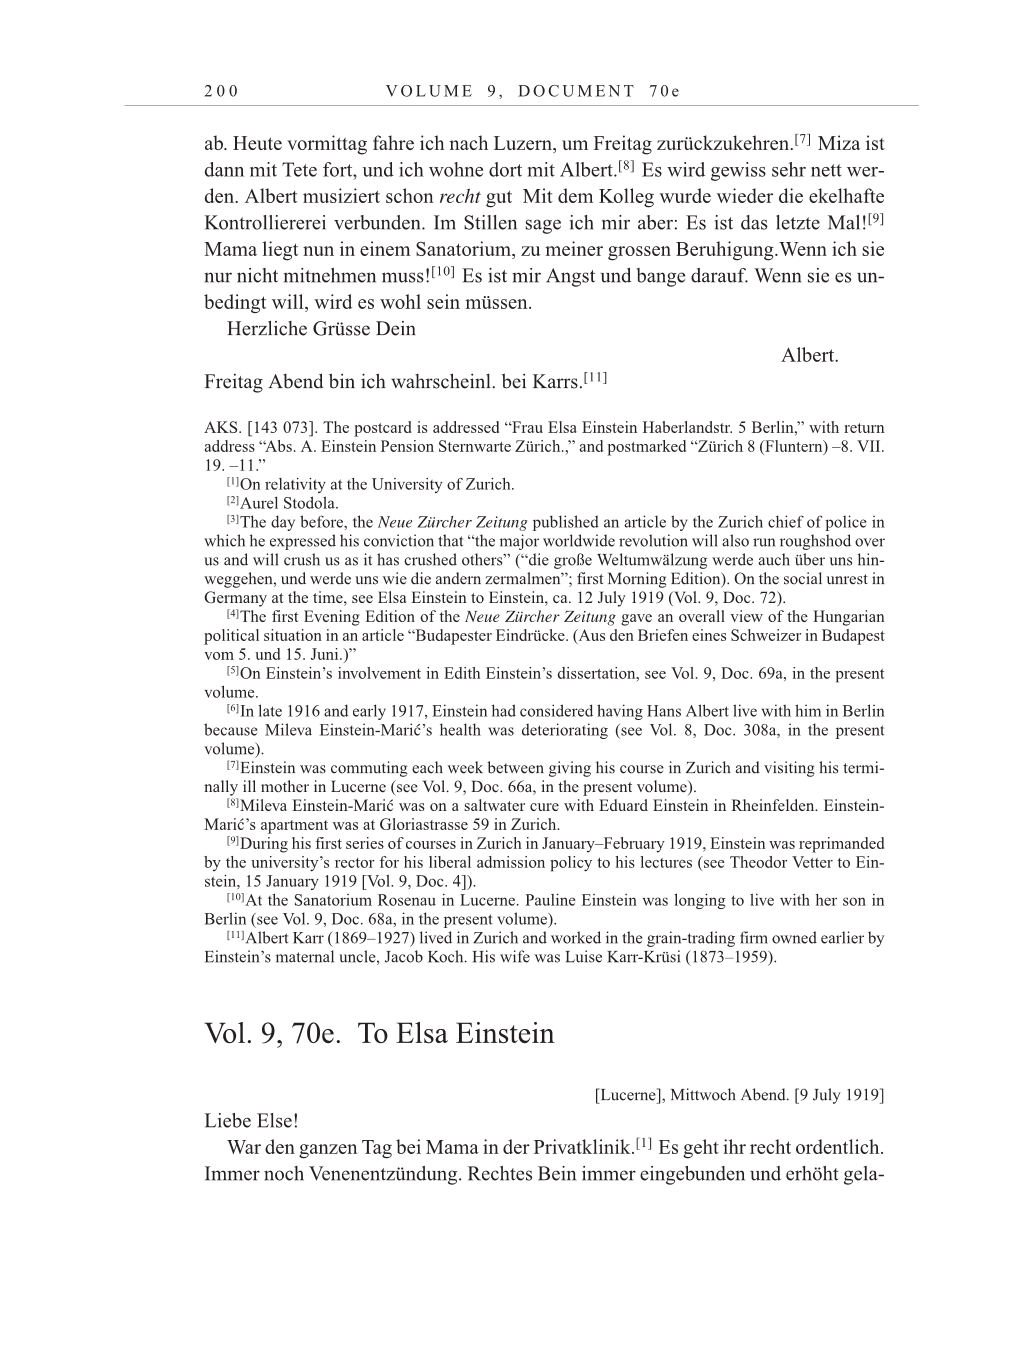 Volume 10: The Berlin Years: Correspondence May-December 1920 / Supplementary Correspondence 1909-1920 page 200